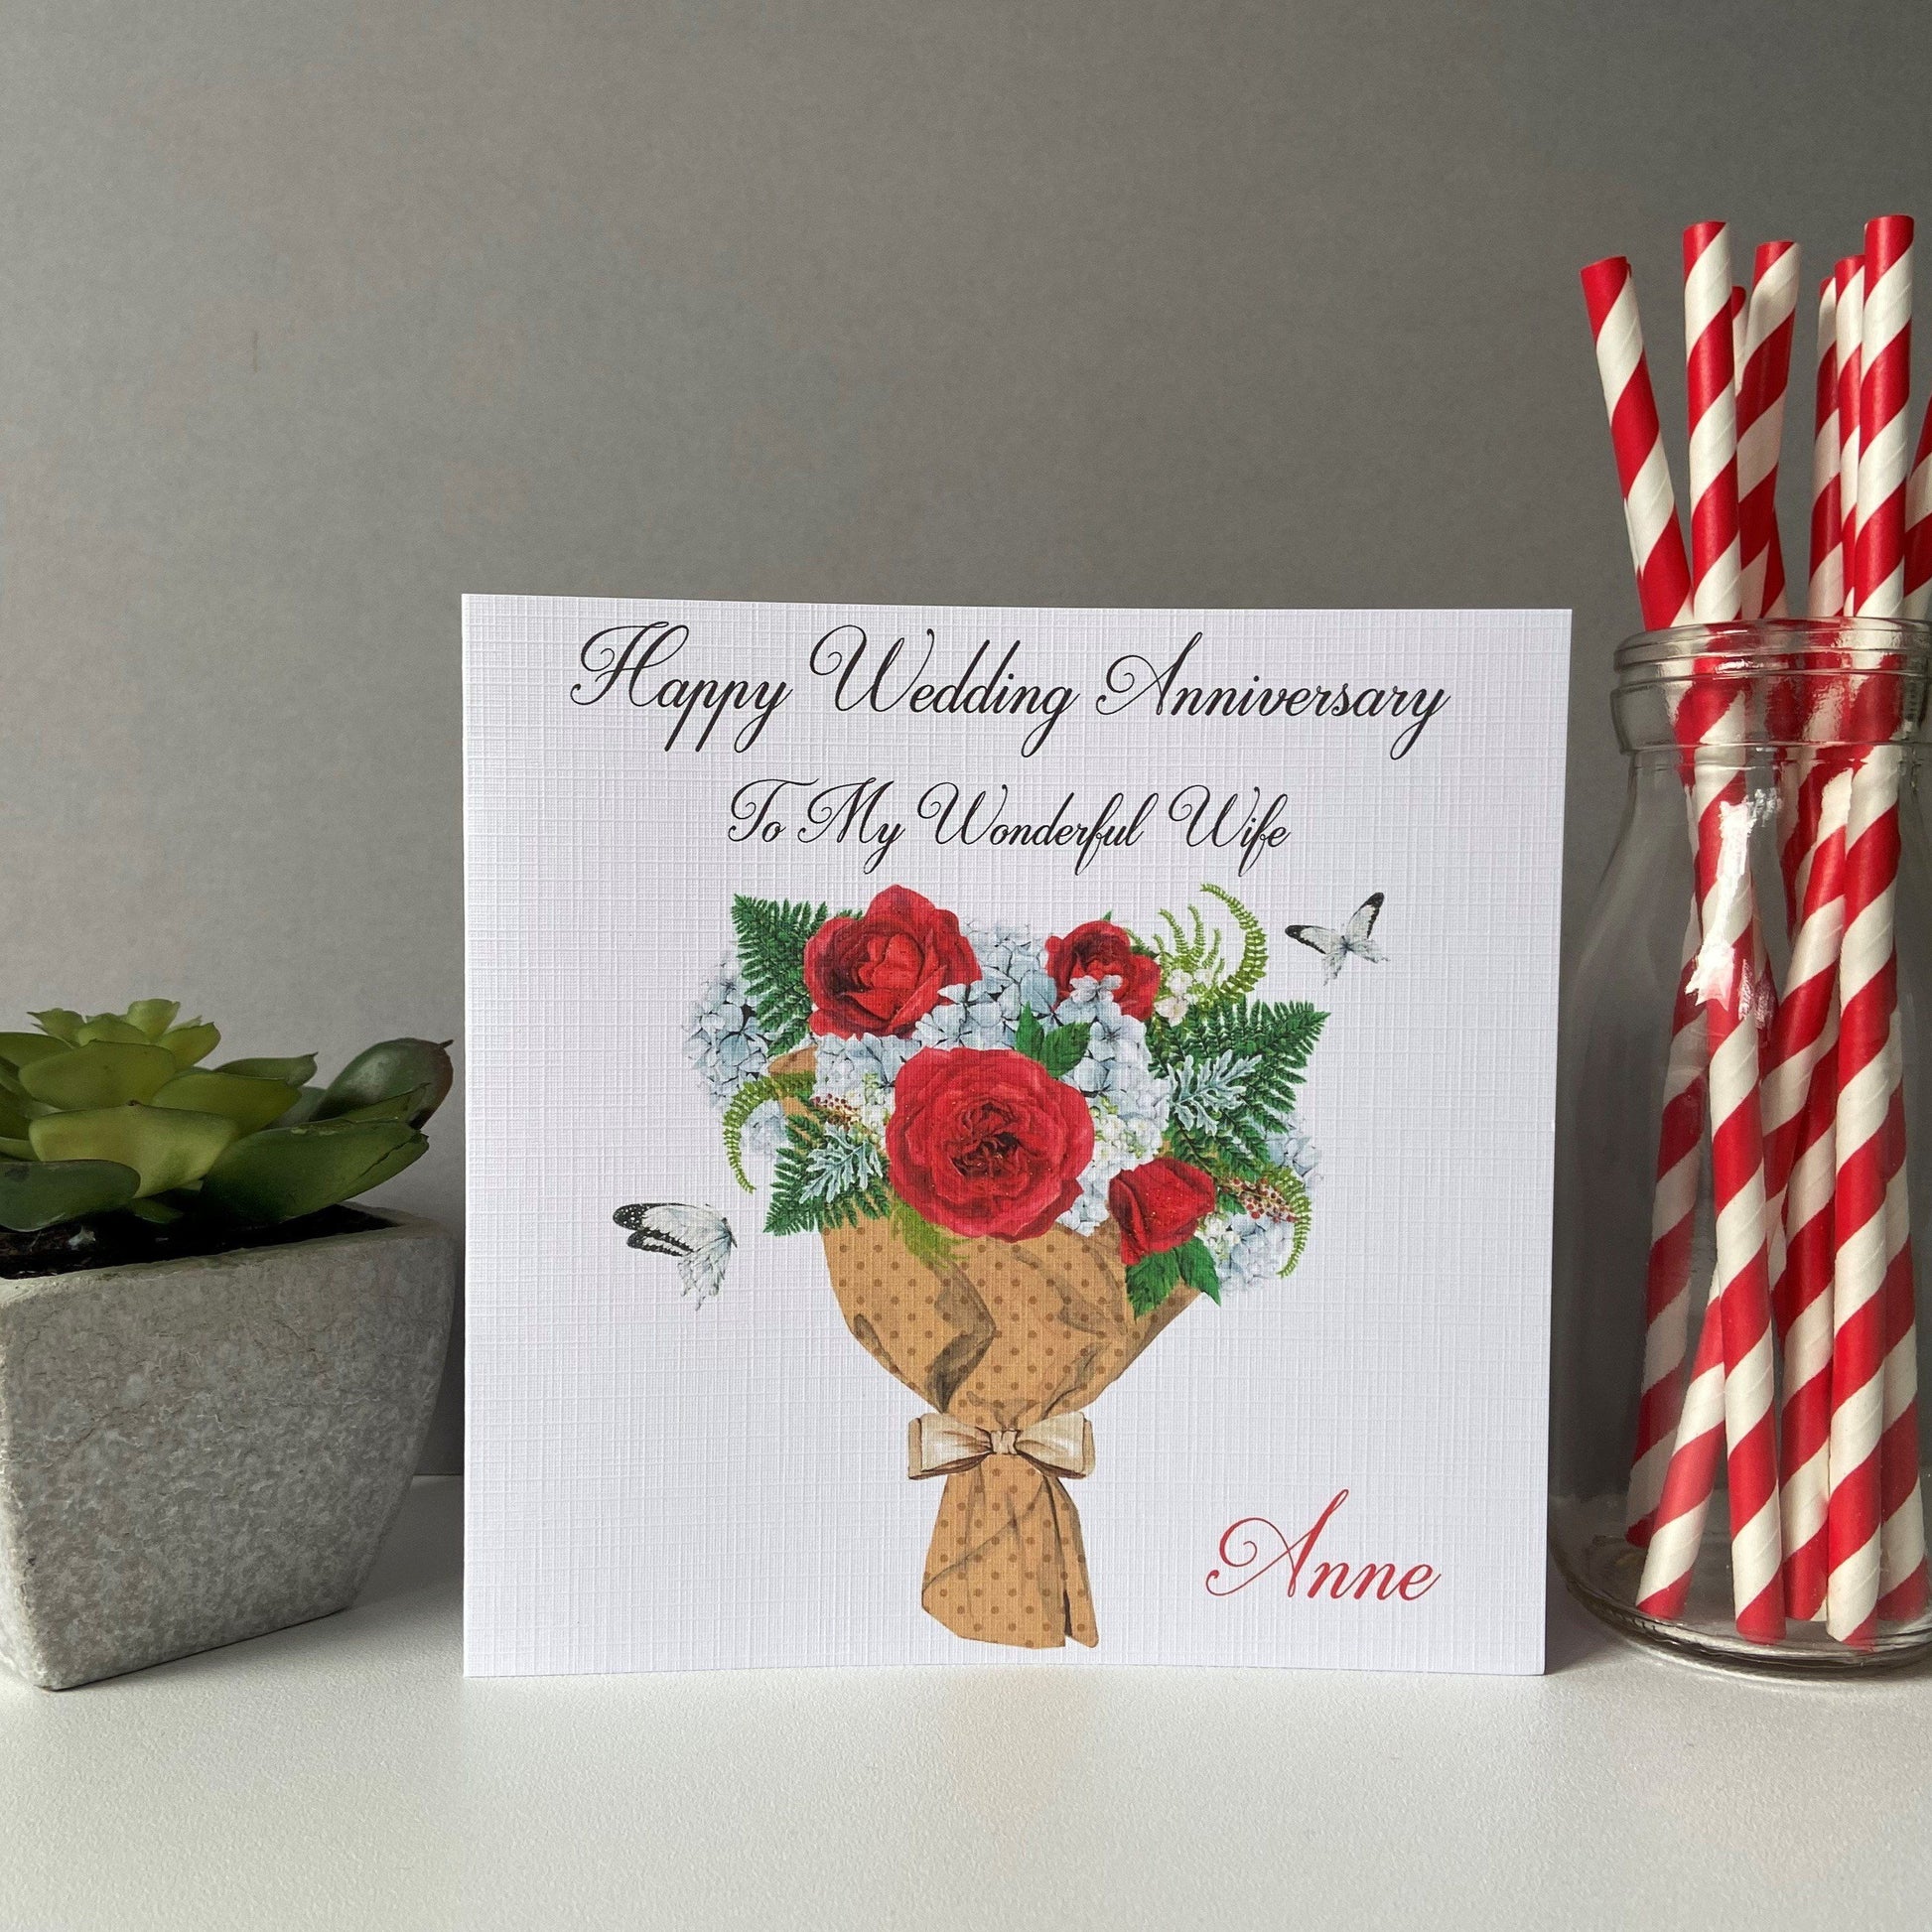 Personalised Handmade Wedding Anniversary Card Floral Bouquet